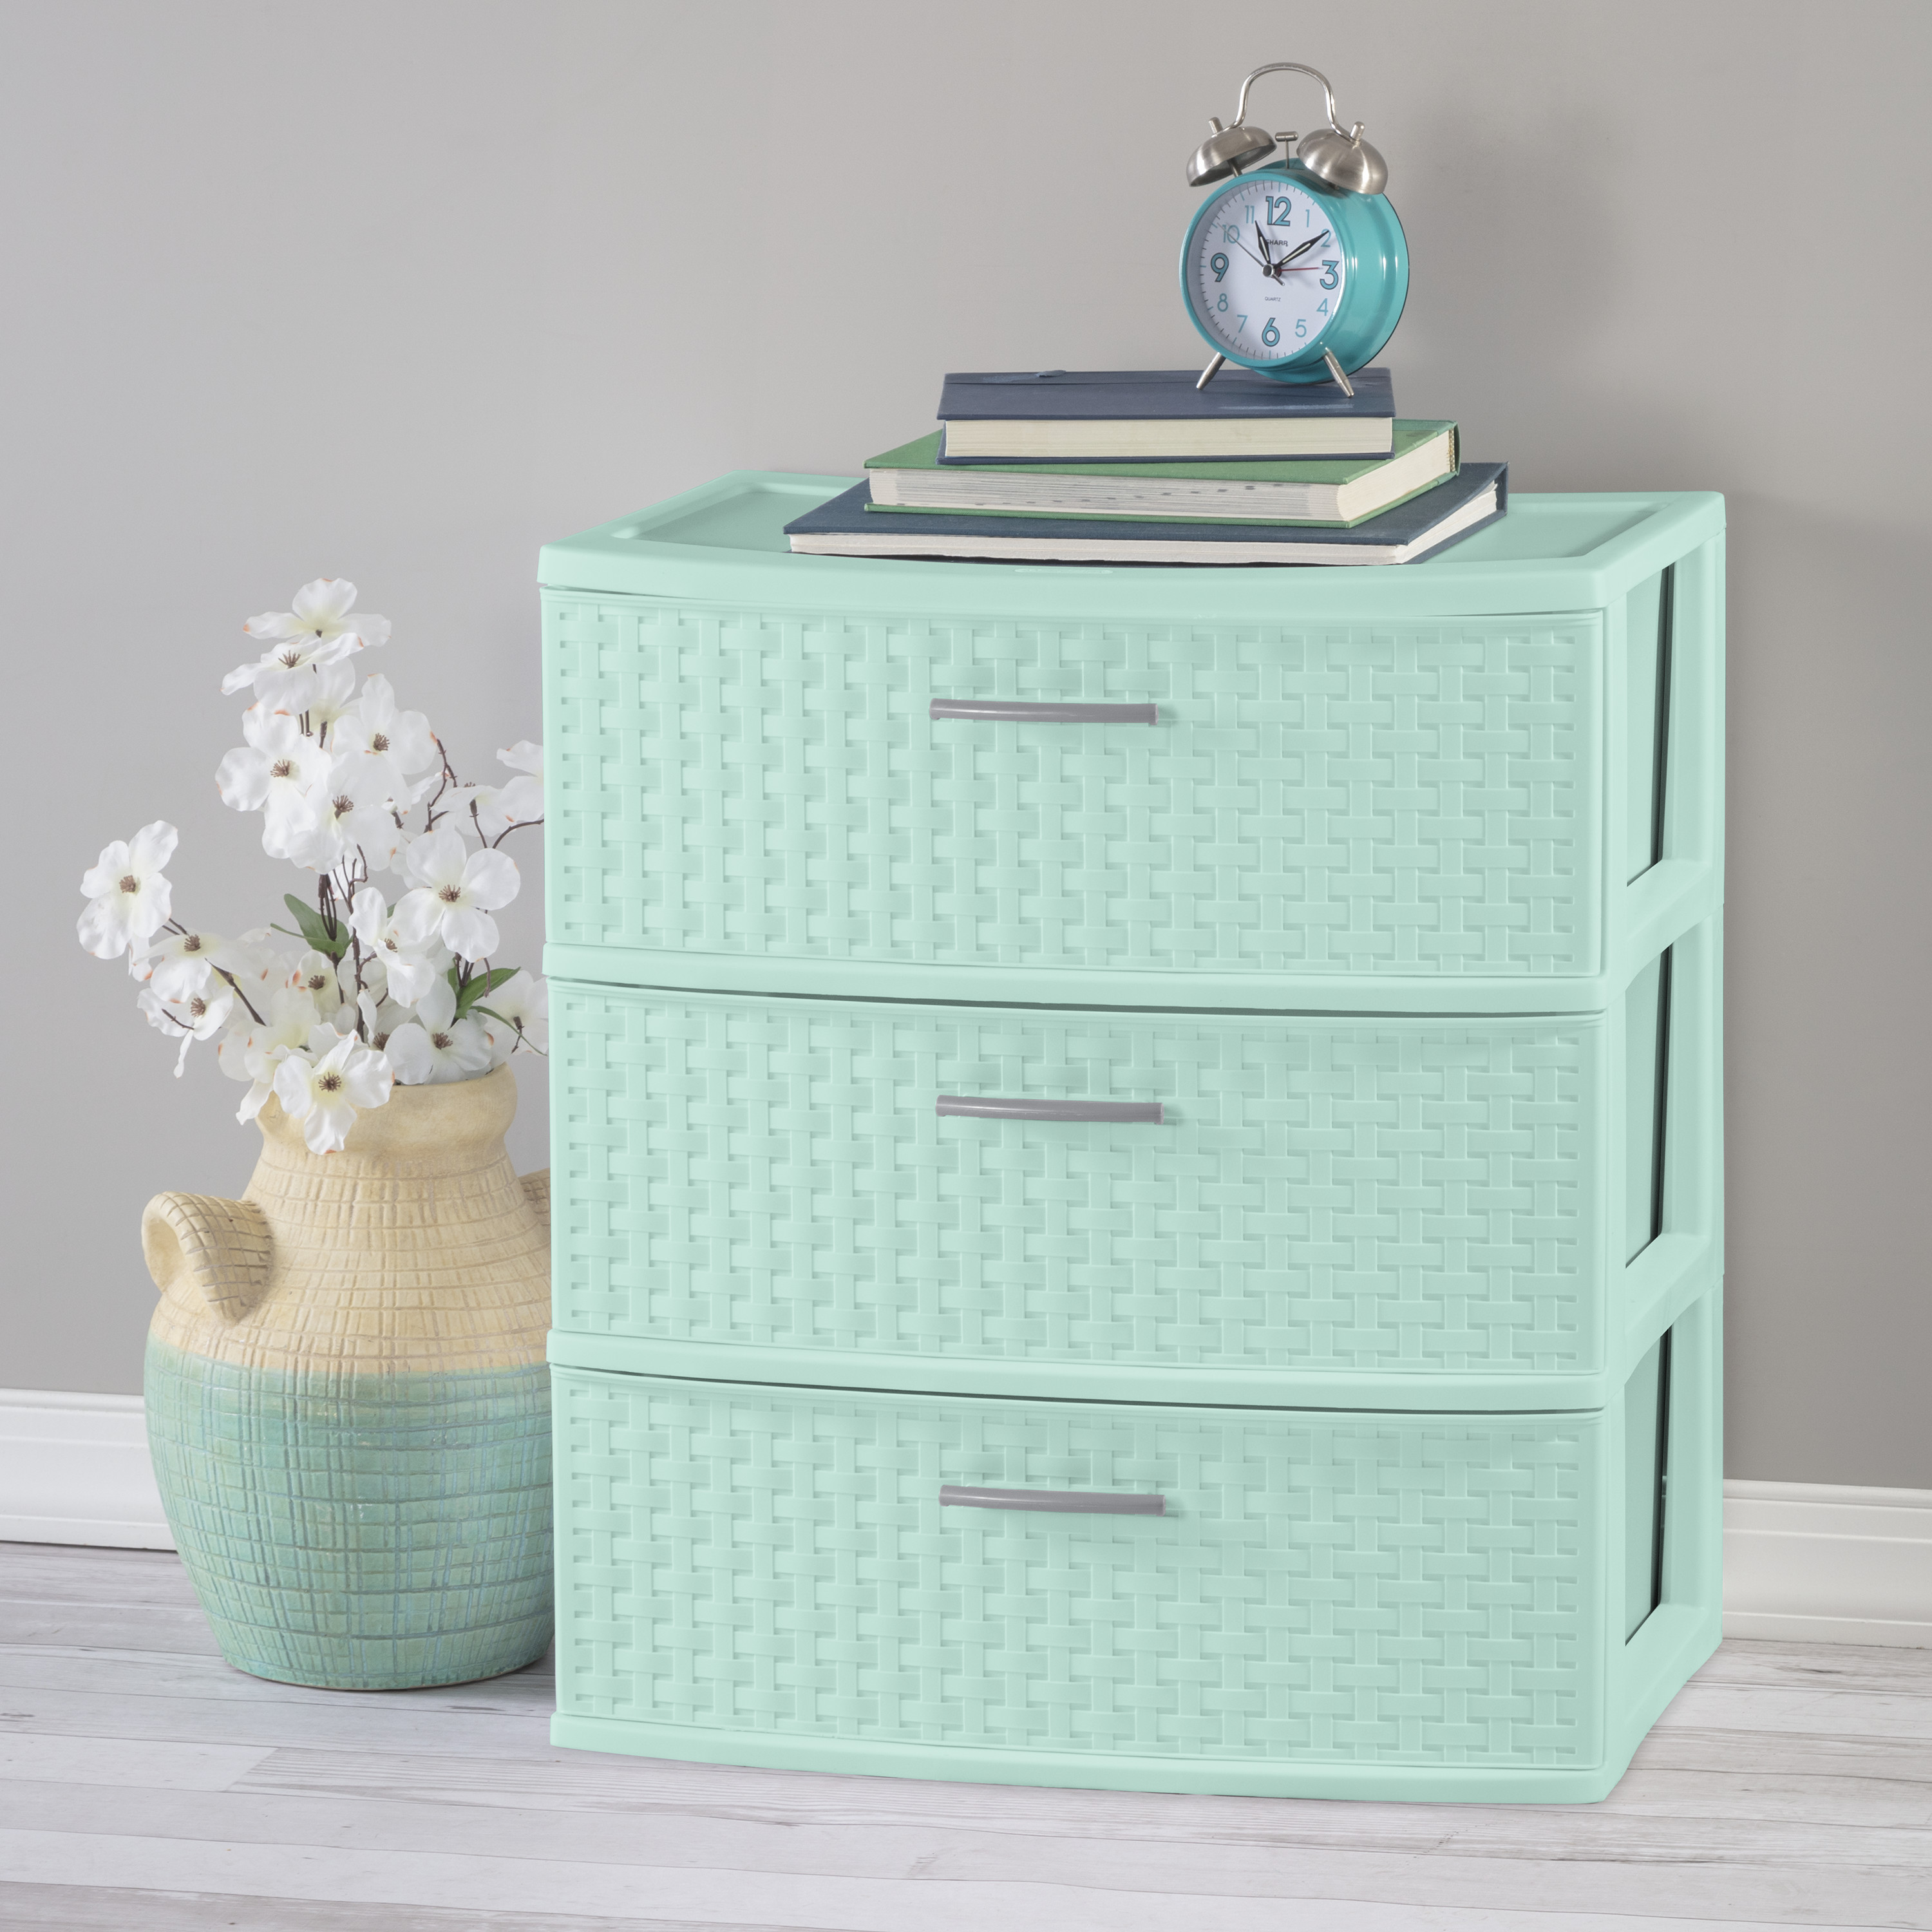 Sterilite 3 Drawer Wide Weave Tower Classic Mint - image 4 of 9